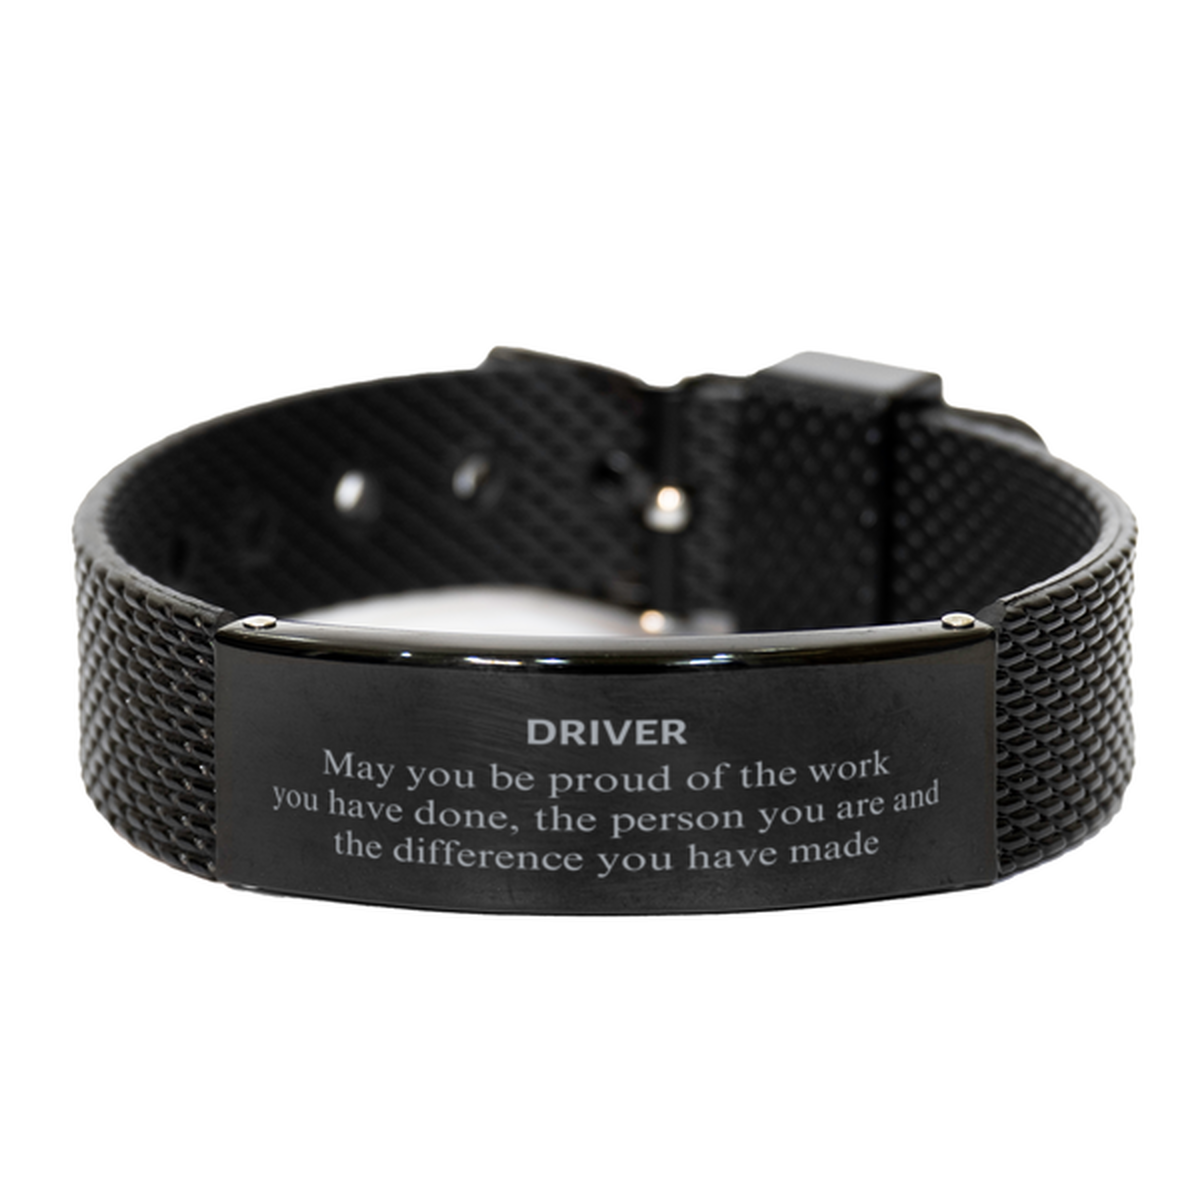 Driver May you be proud of the work you have done, Retirement Driver Black Shark Mesh Bracelet for Colleague Appreciation Gifts Amazing for Driver